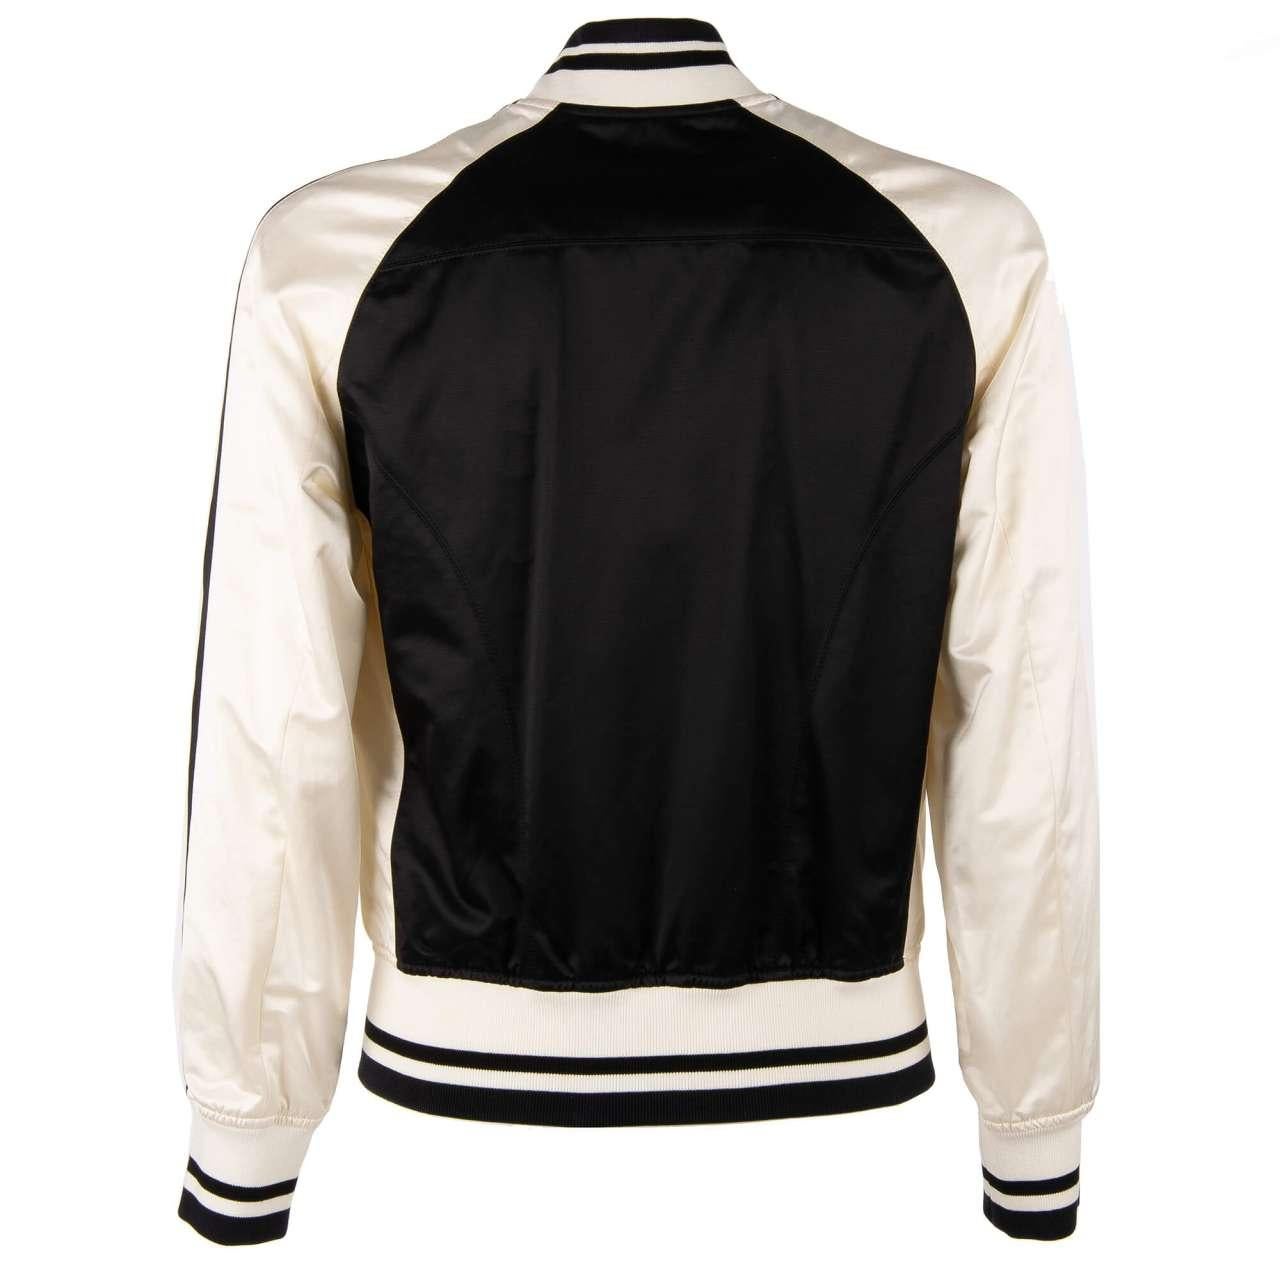 - Varsity / College Jacket with embroidered DG Logo, zip closure, knitted details and pockets with zip closure by DOLCE & GABBANA - New with tag - Former RRP: EUR 1.850 - Regular cut - MADE IN ITALY - Model: G9JW1Z-FUMDQ-B0665 - Material: 57%